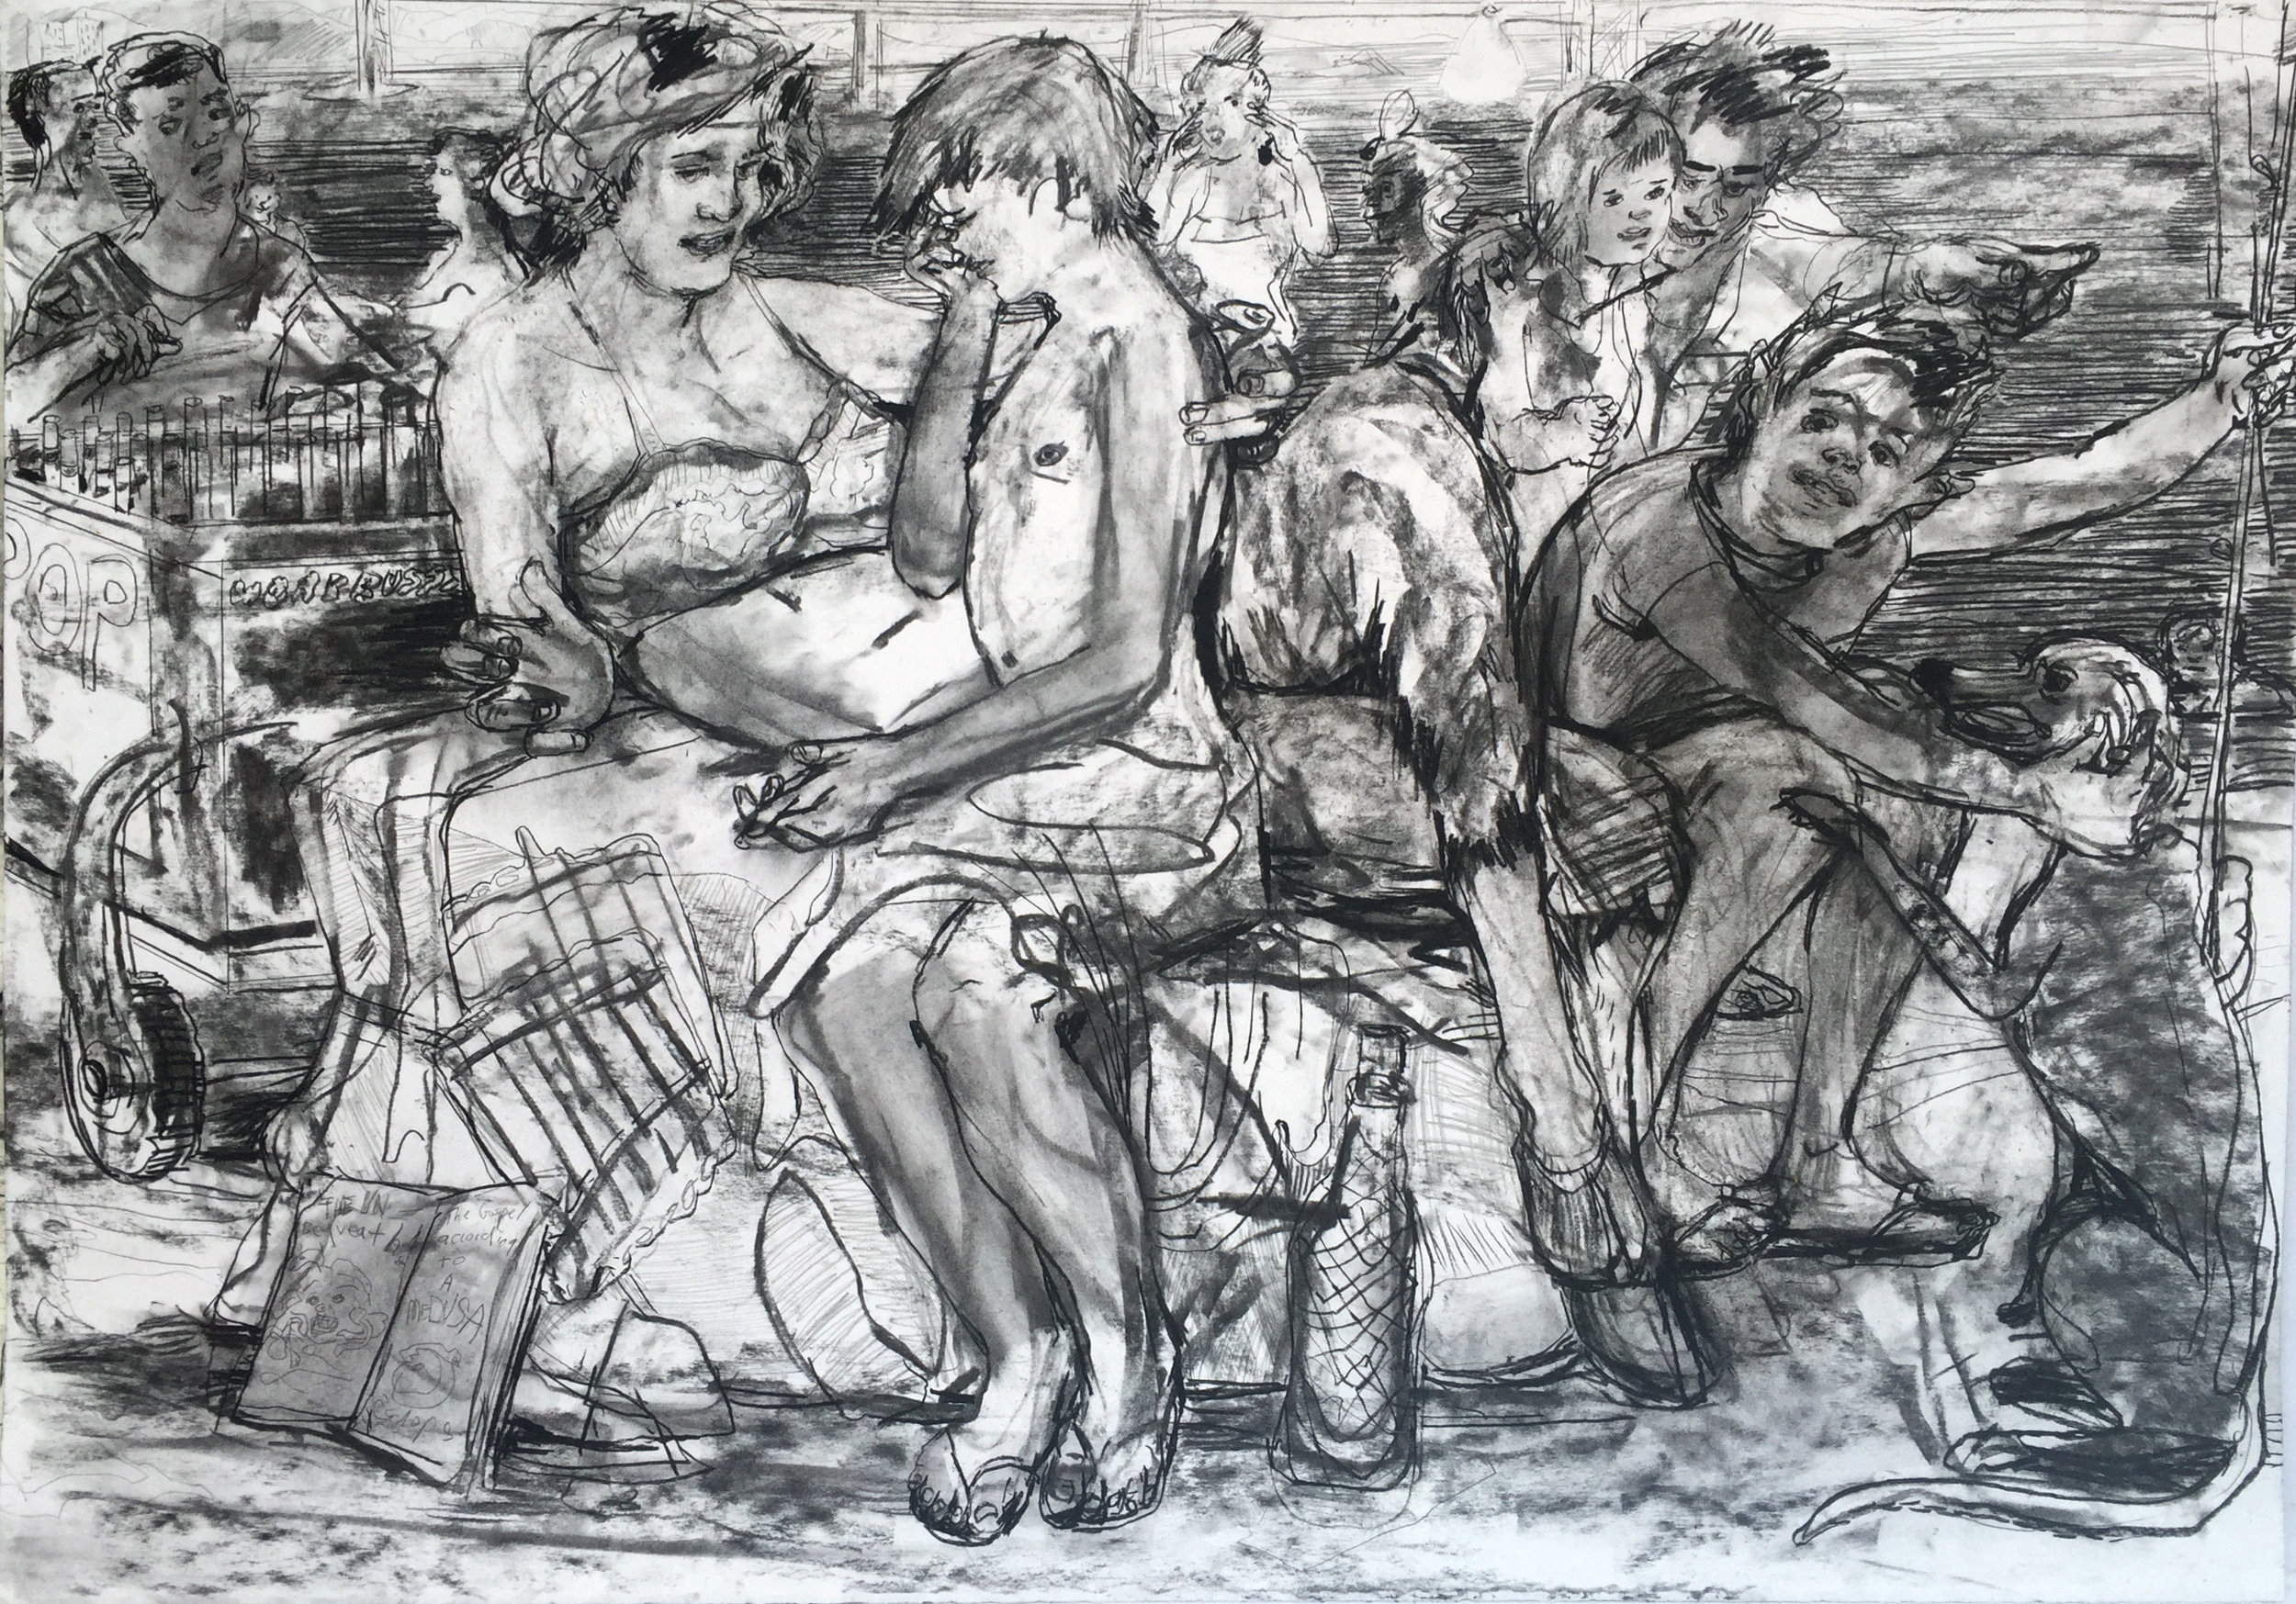 Beach Lessons?  28 by 40 inches charcoal on paper 2017.jpg